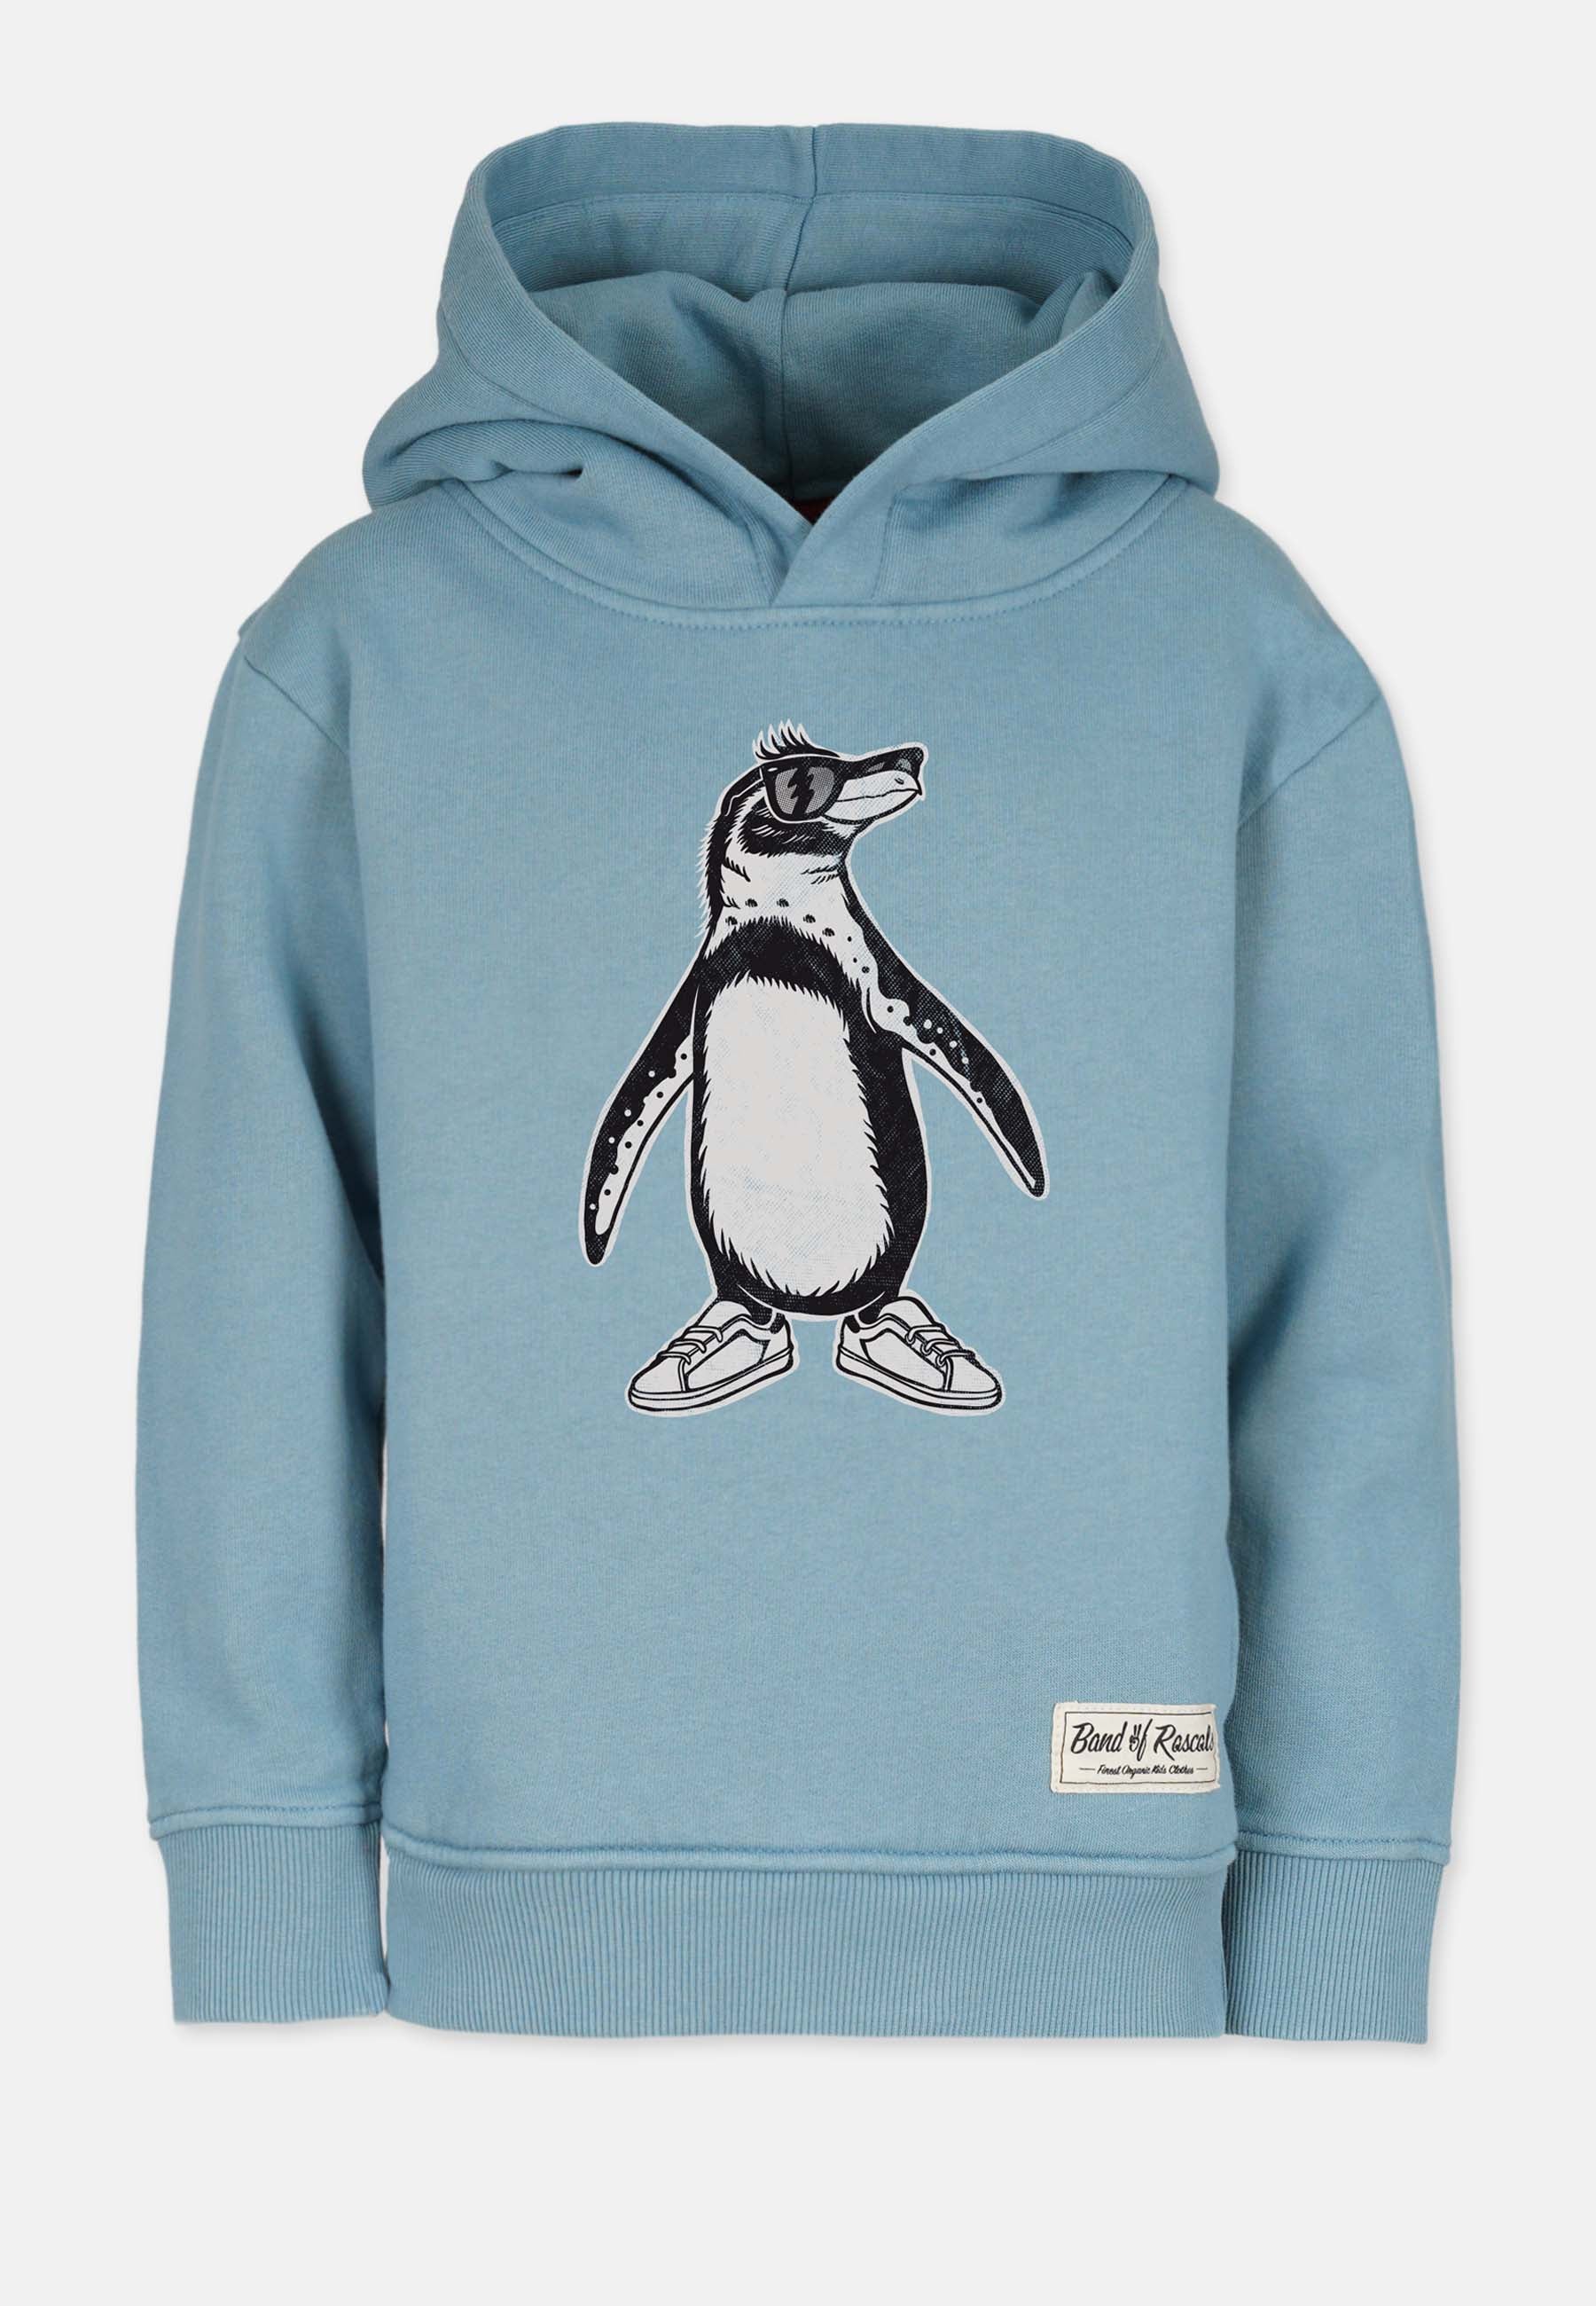 Too Cool for School Hooded